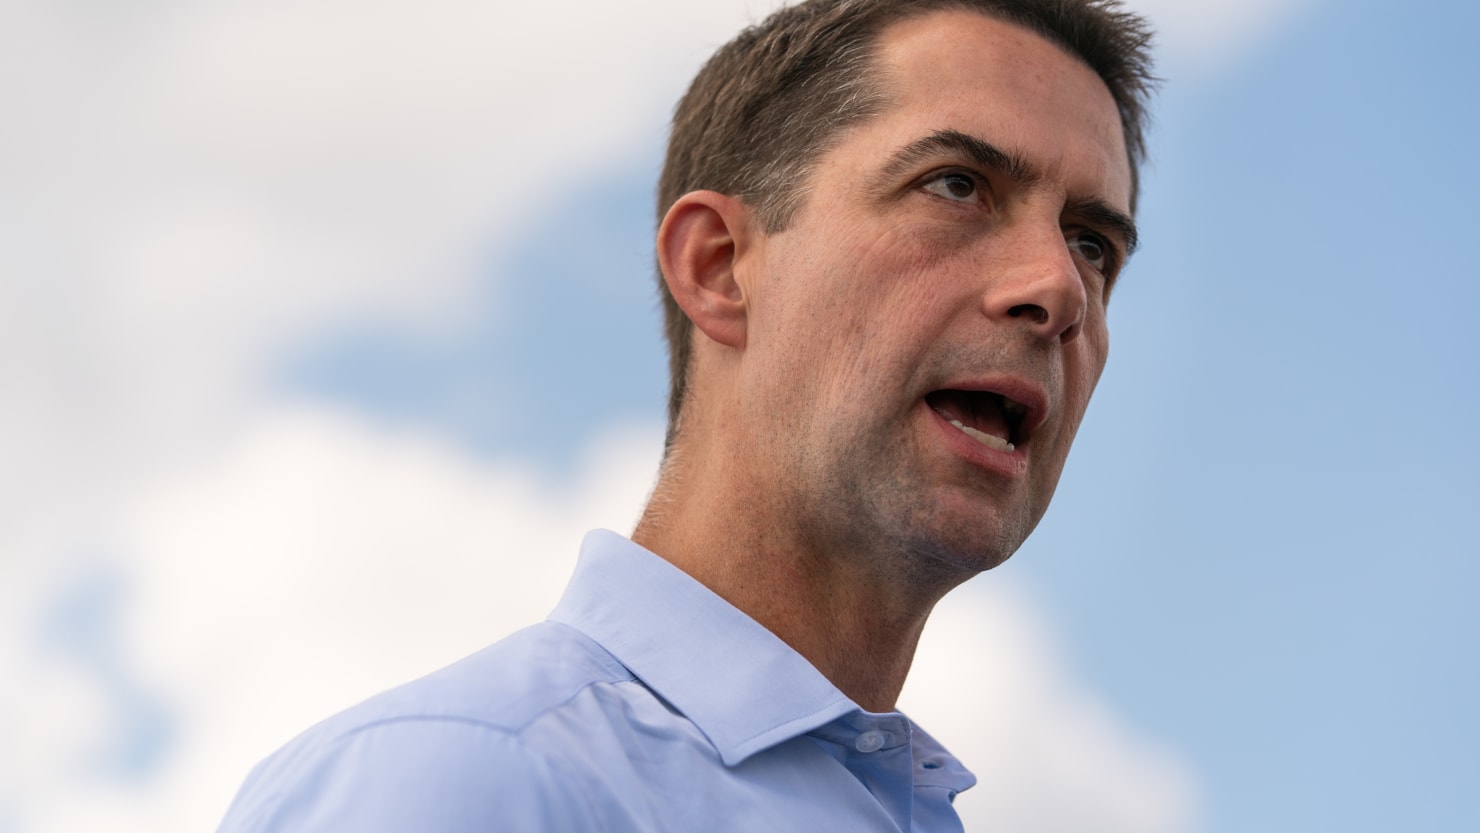 Tom Cotton Says He Will Not Run for President in 2024, Report Says